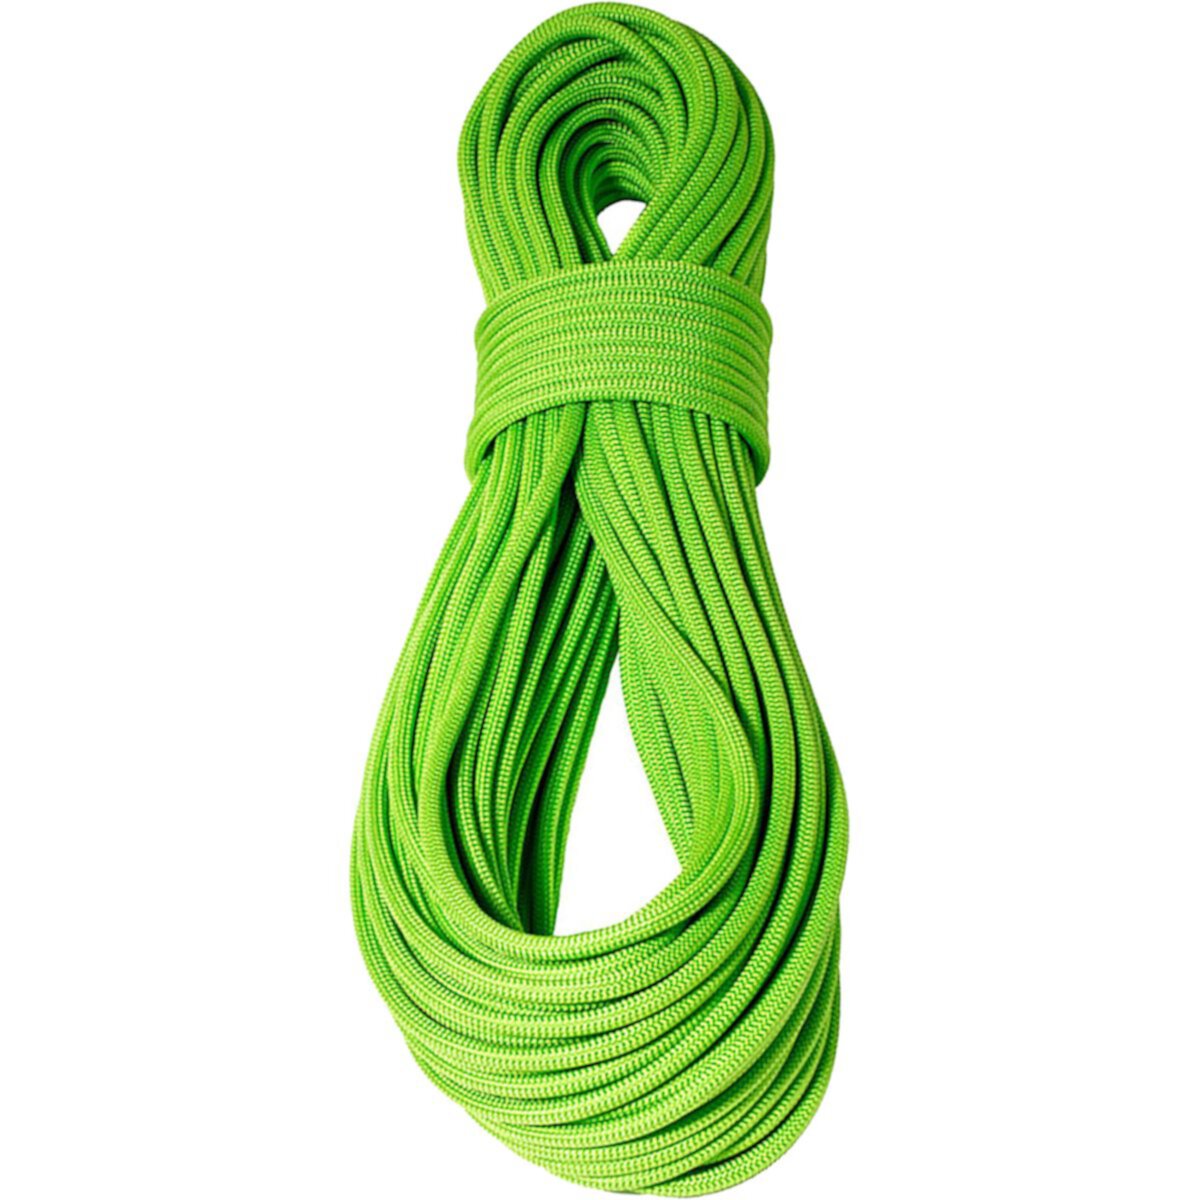 Tendon Ropes Lowe Standard Climbing Rope - 9.7mm Tendon Ropes